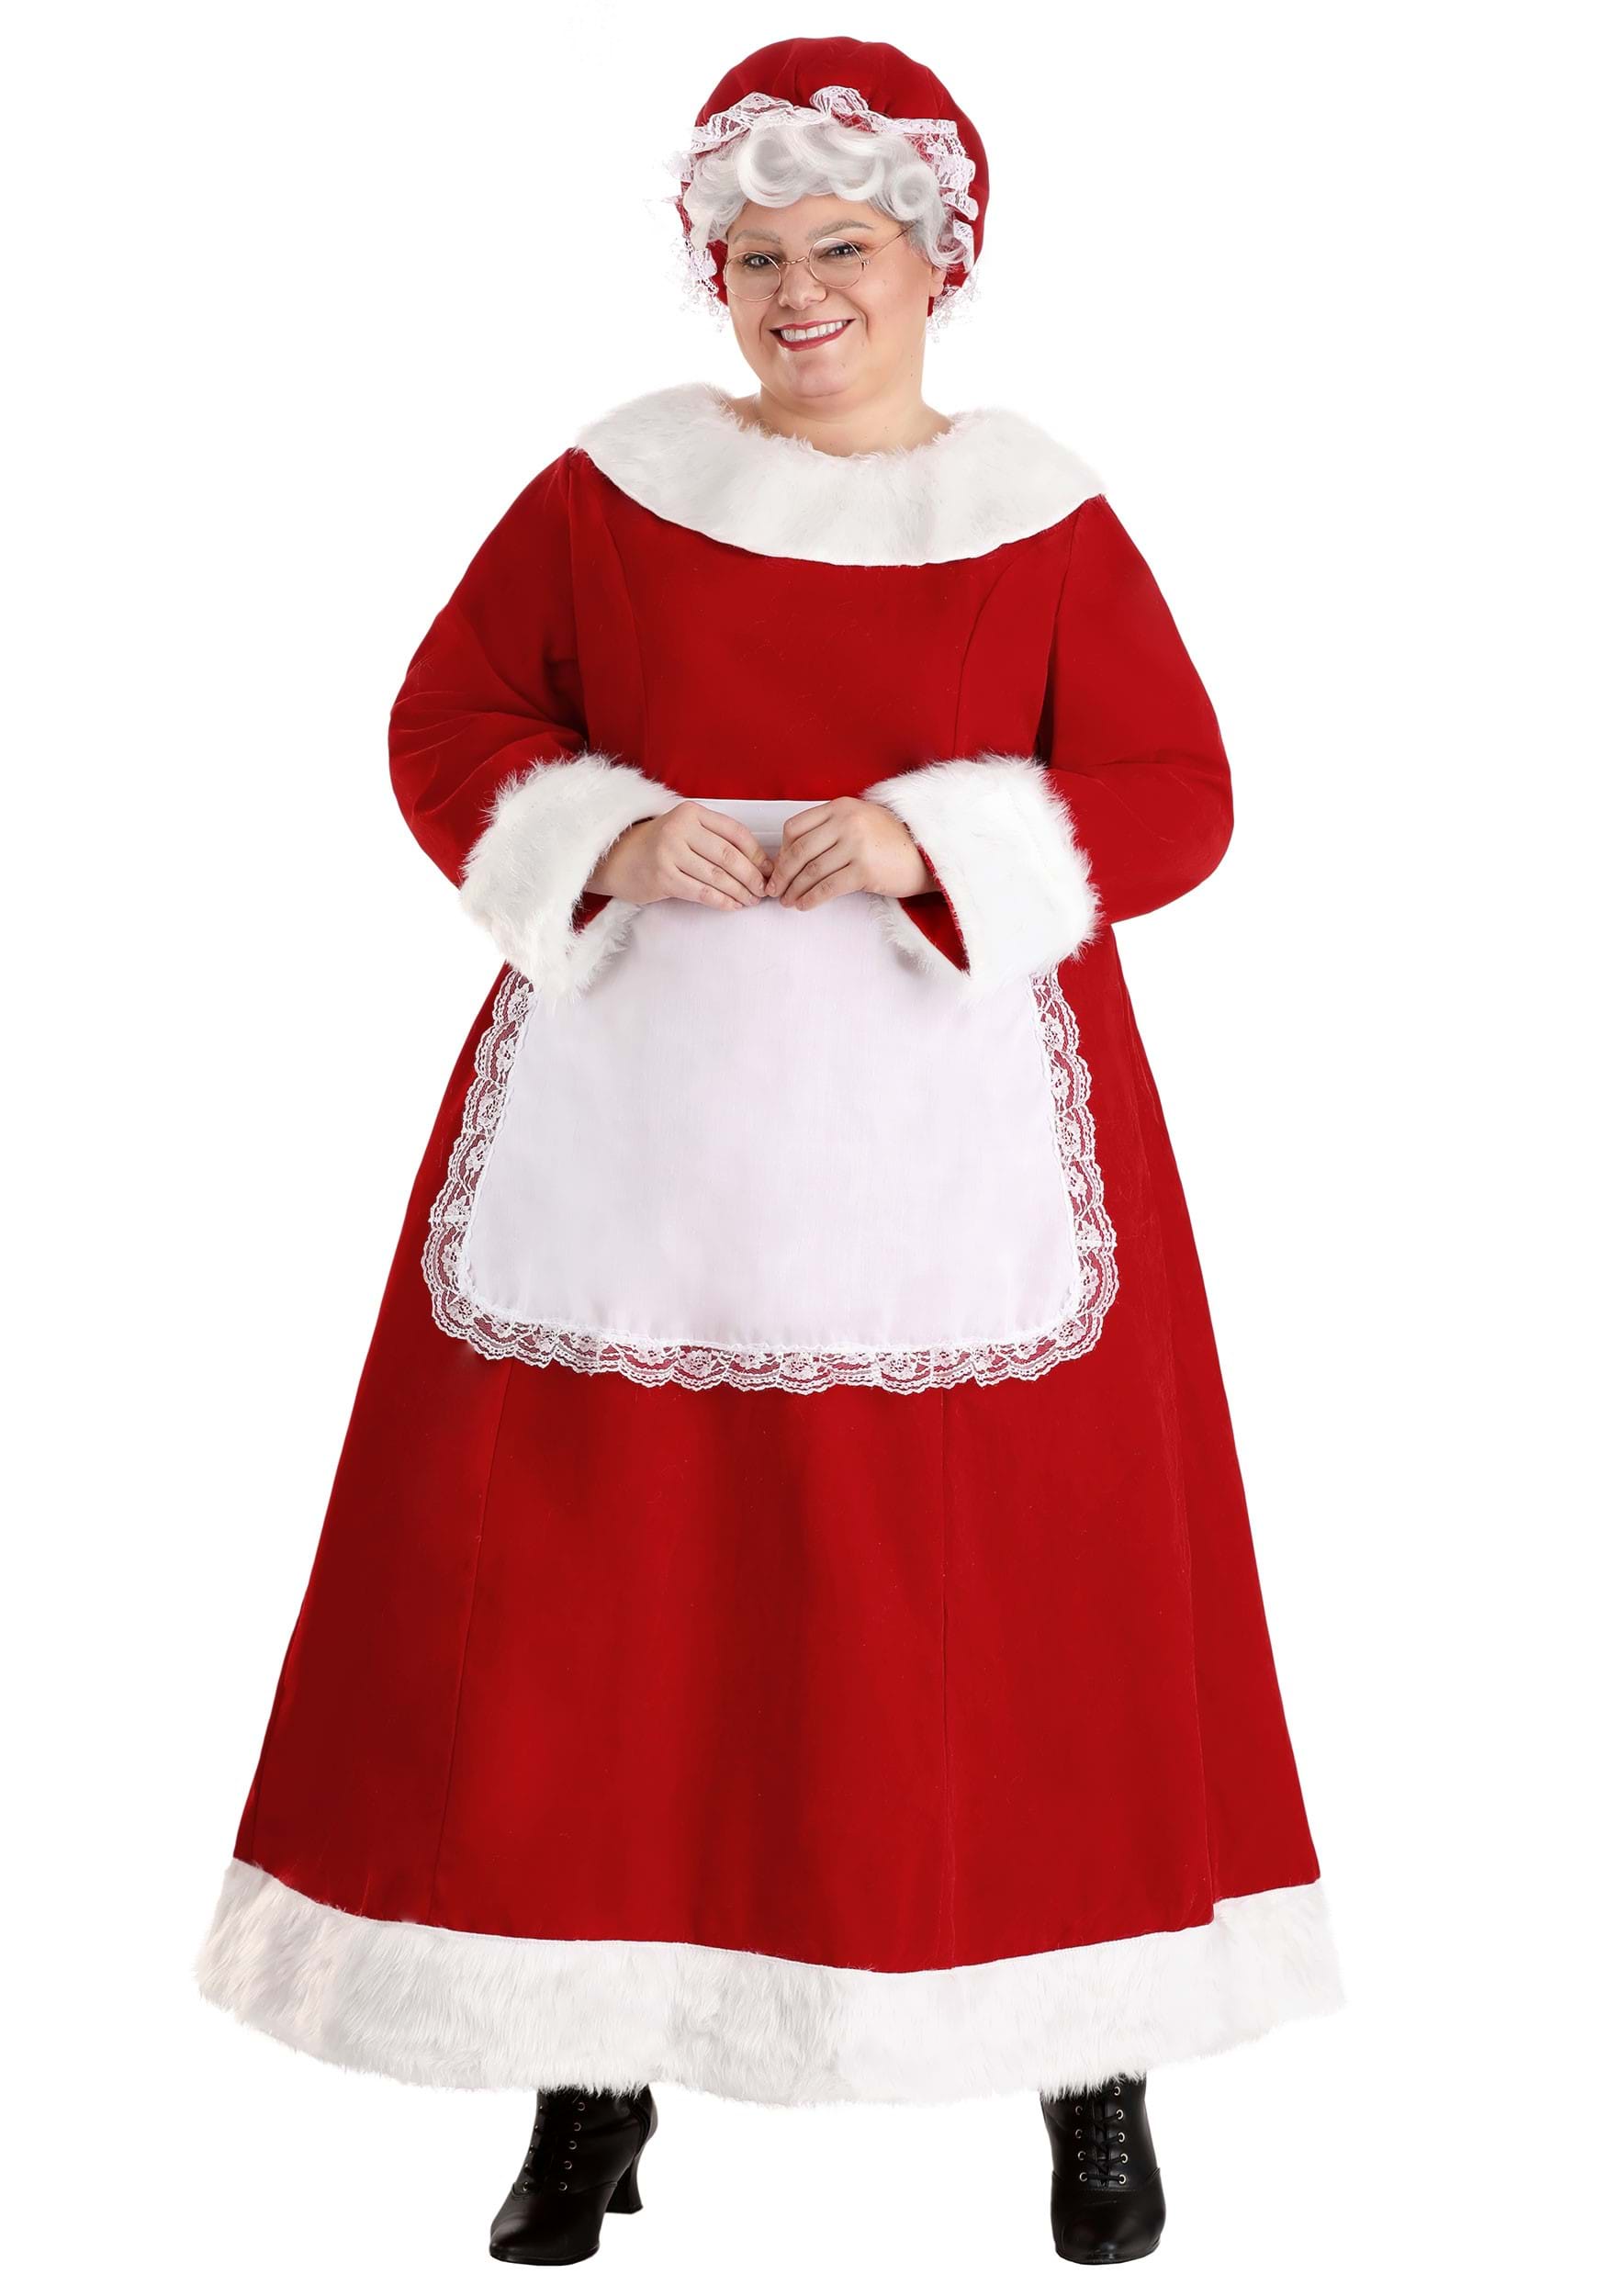 Photos - Fancy Dress Deluxe FUN Costumes Plus Size Mrs. Claus  Costume for Women Red FUN205 